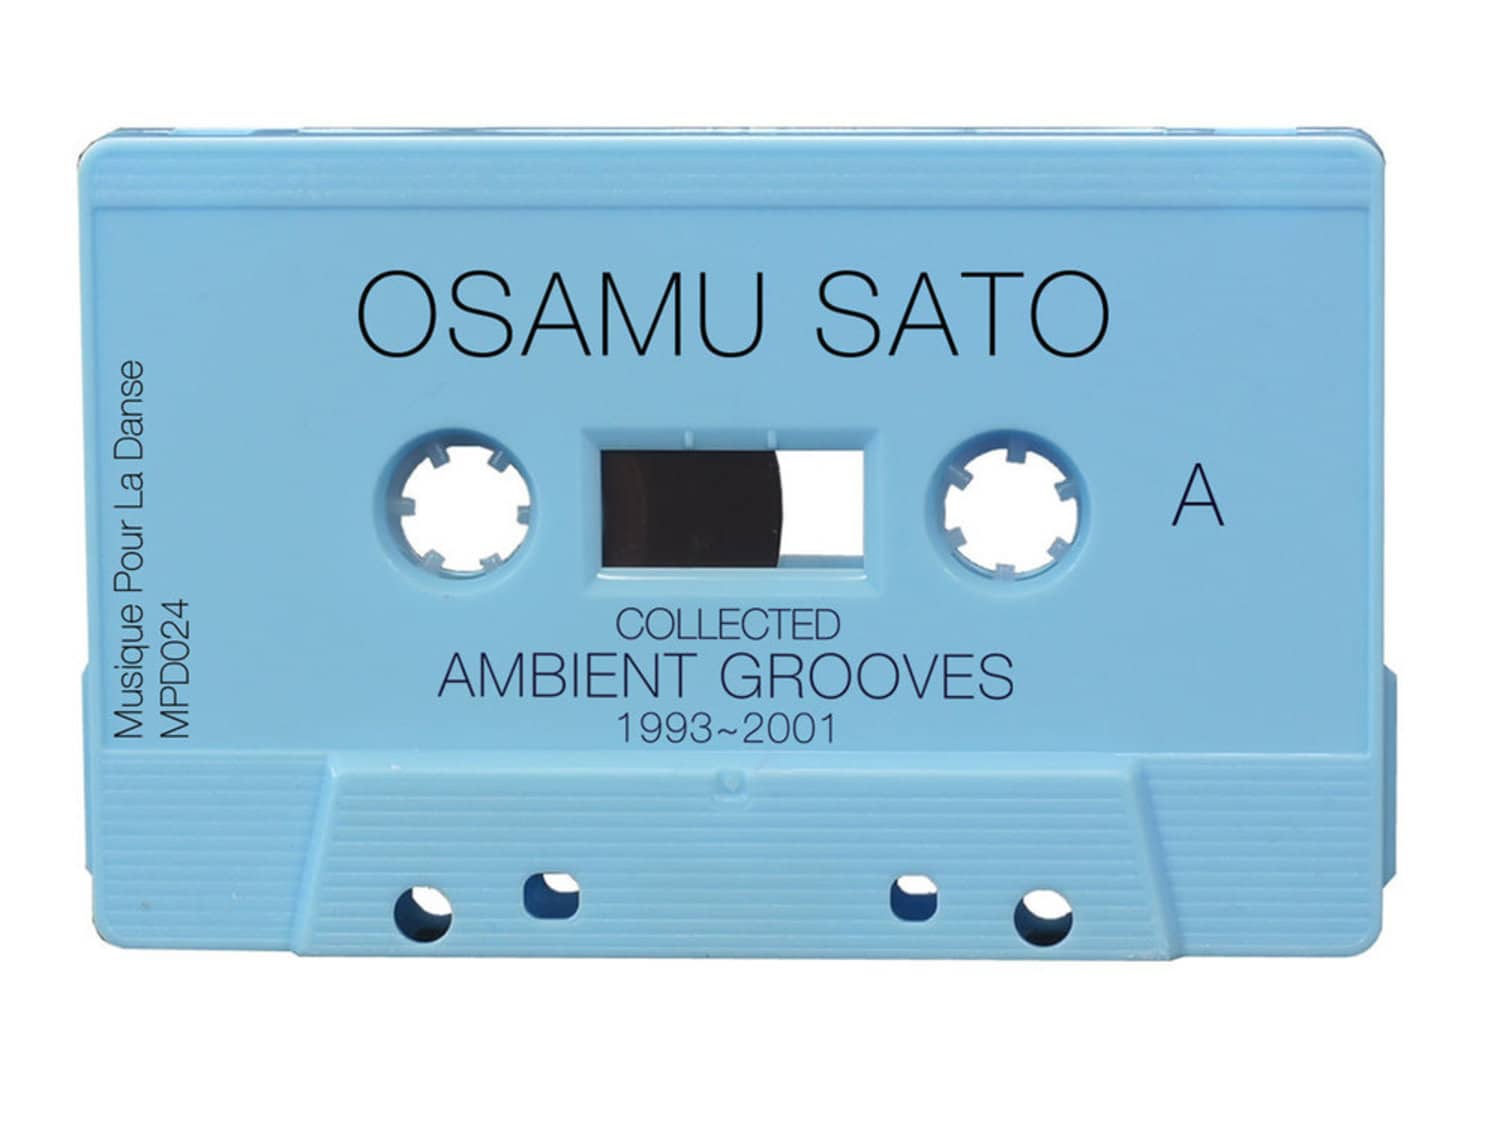 Osamu Sato - COLLECTED AMBIENT GROOVES 1993-2001 